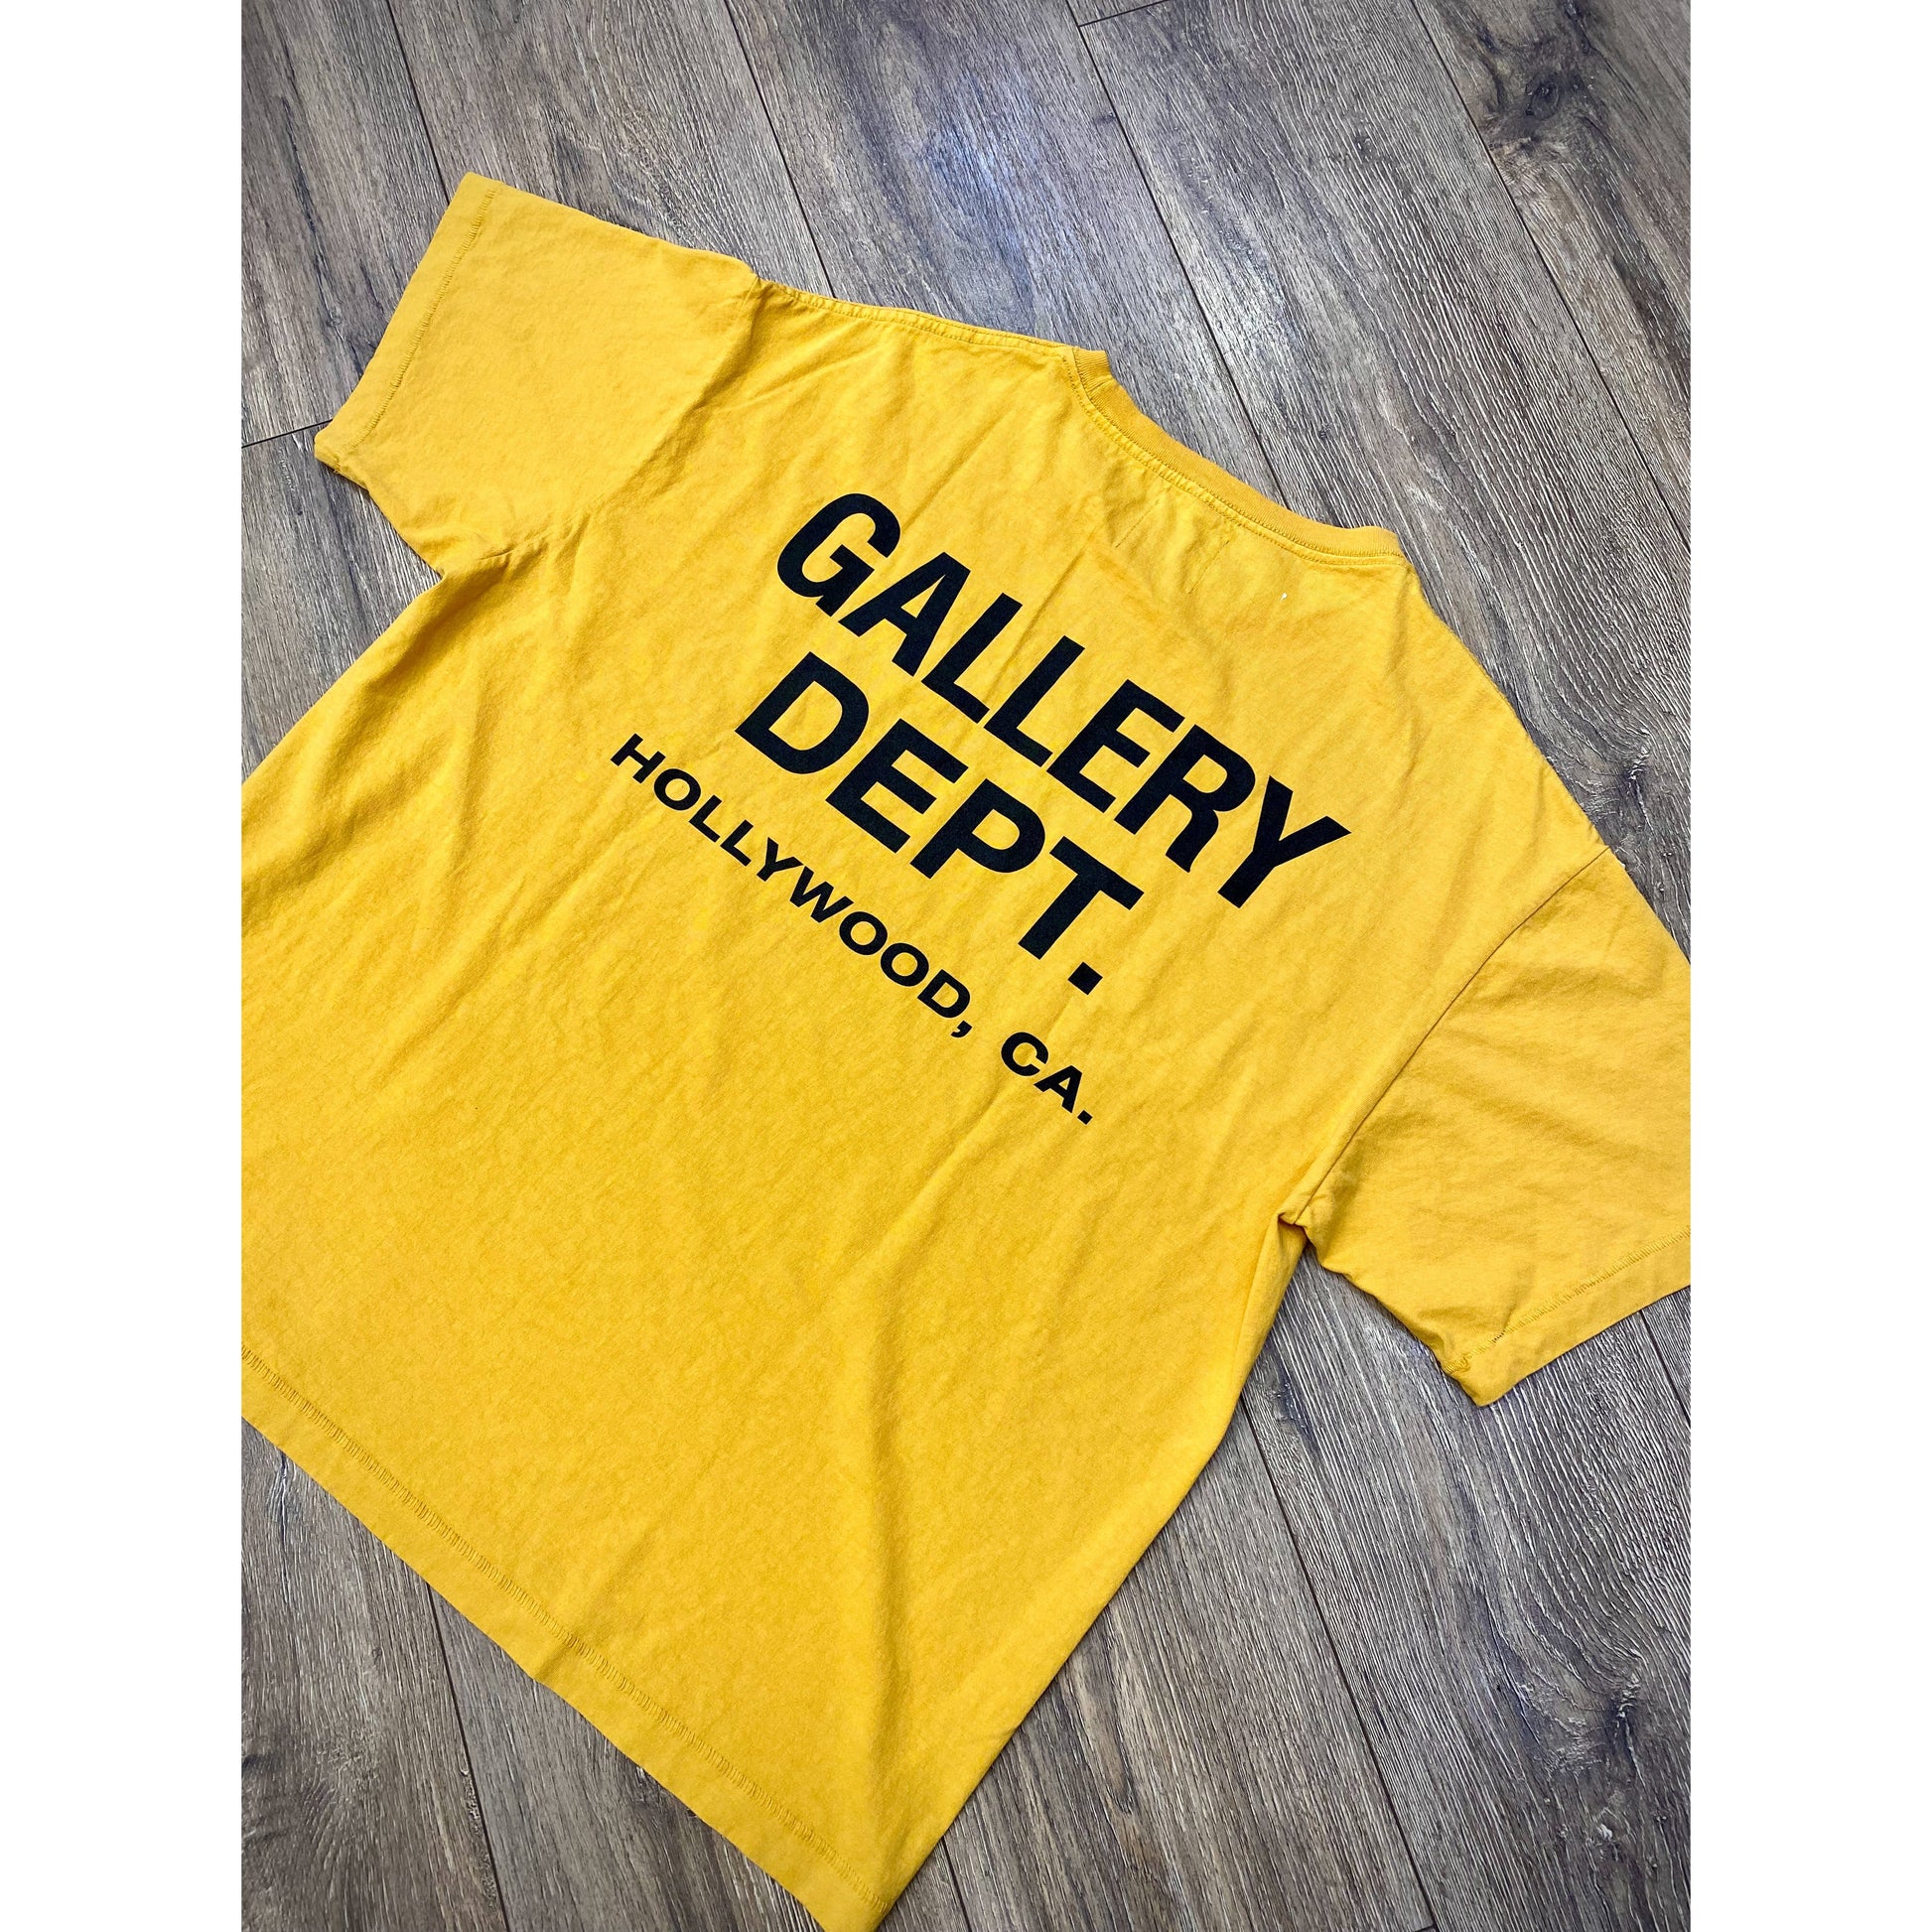 Gallery Dept. Vintage Souvenir T-Shirt Yellow by GALLERY DEPT. from £175.99